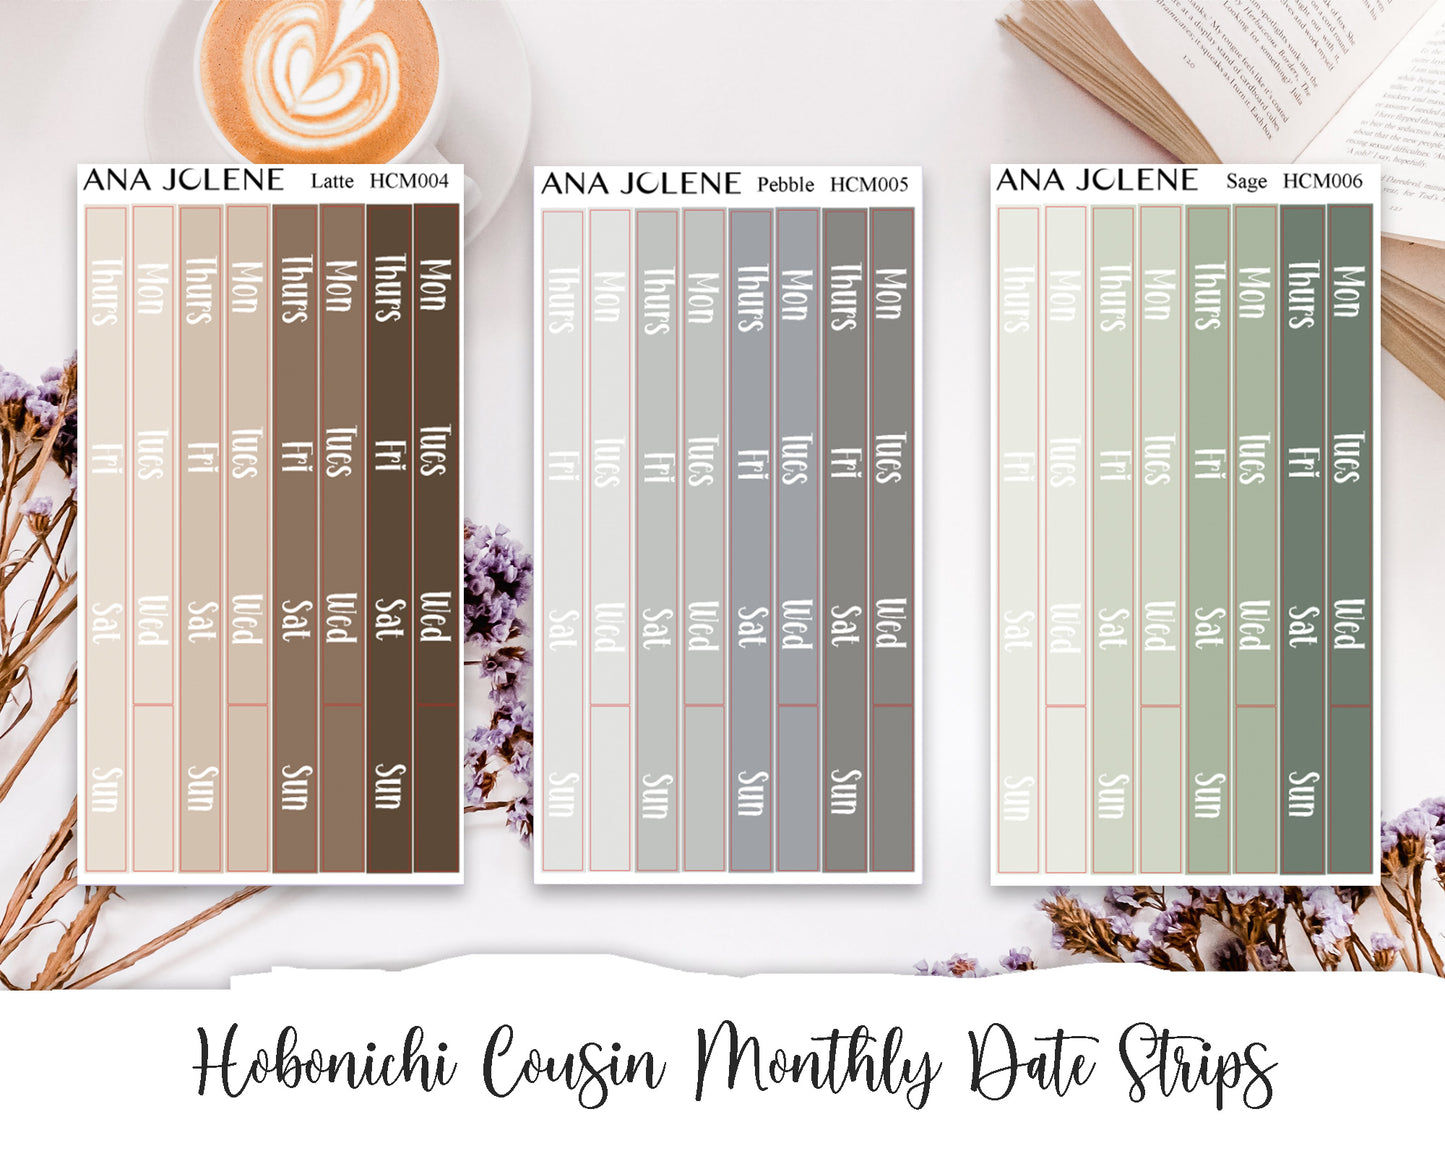 Hobonichi Cousin Monthly Date Strips